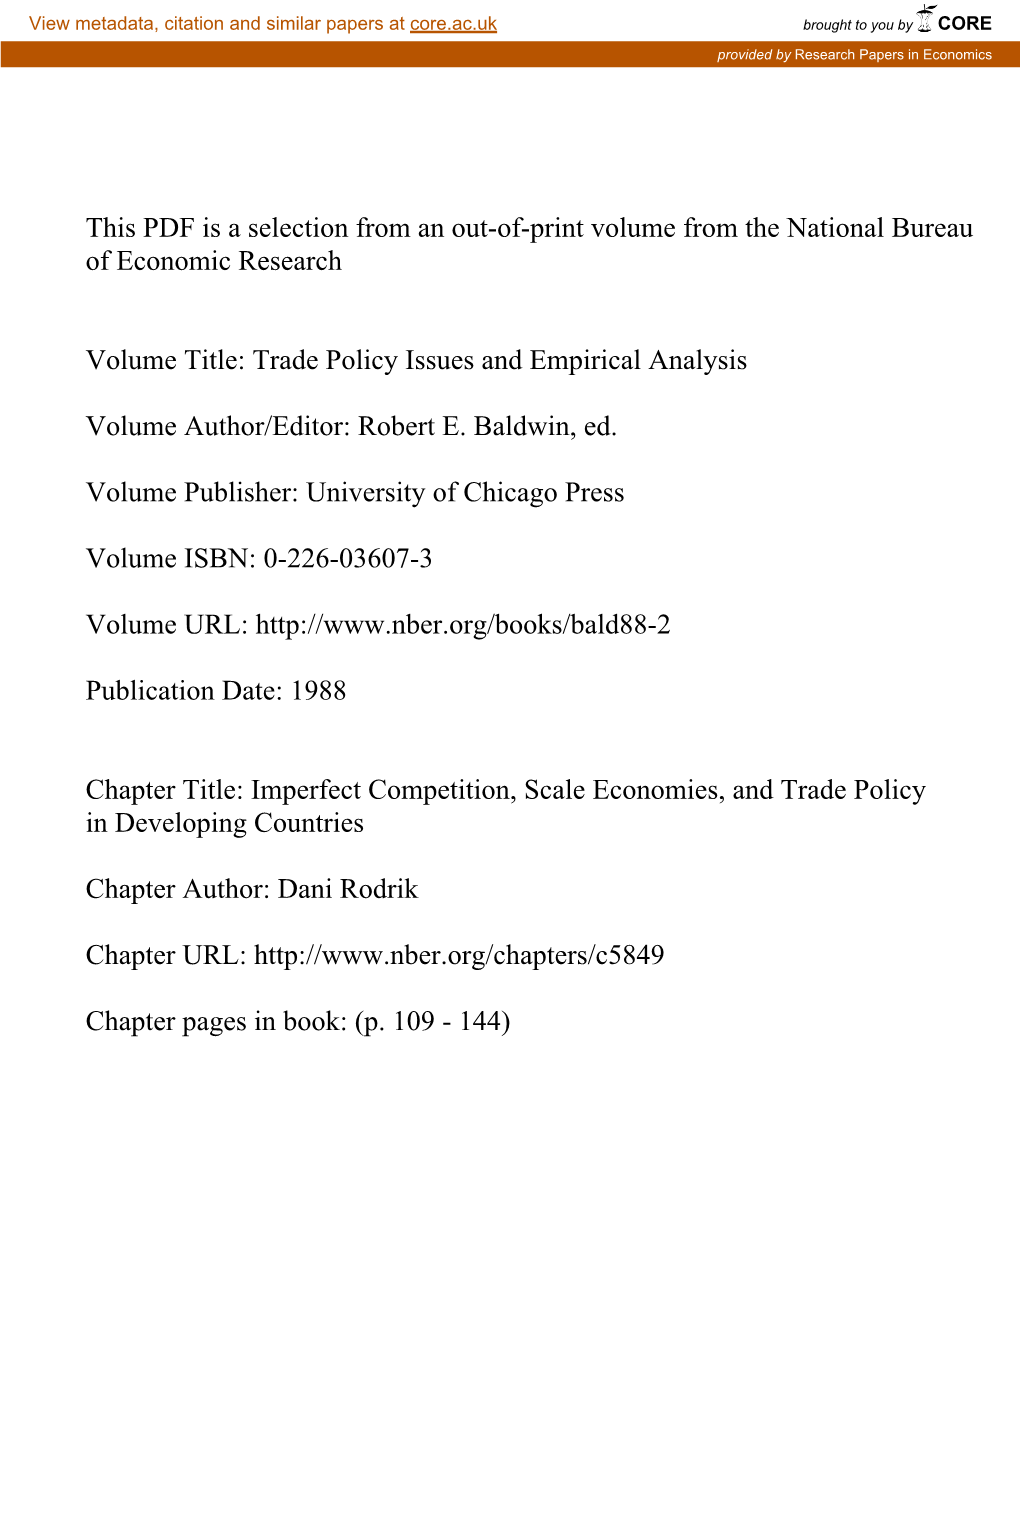 Imperfect Competition, Scale Economies, and Trade Policy in Developing Countries